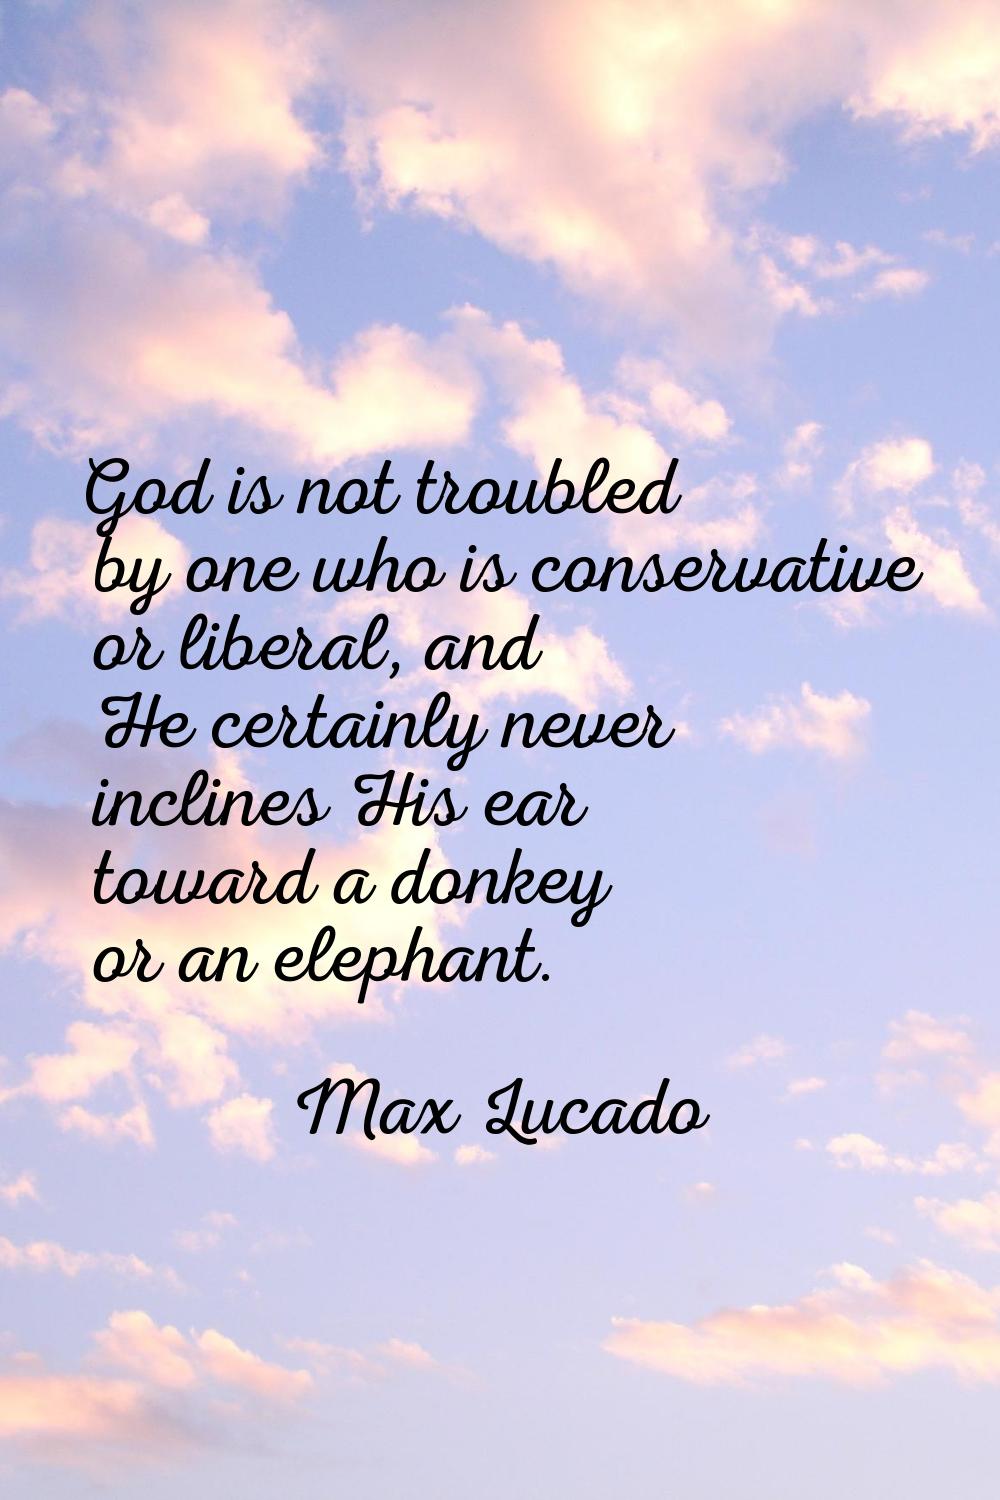 God is not troubled by one who is conservative or liberal, and He certainly never inclines His ear 